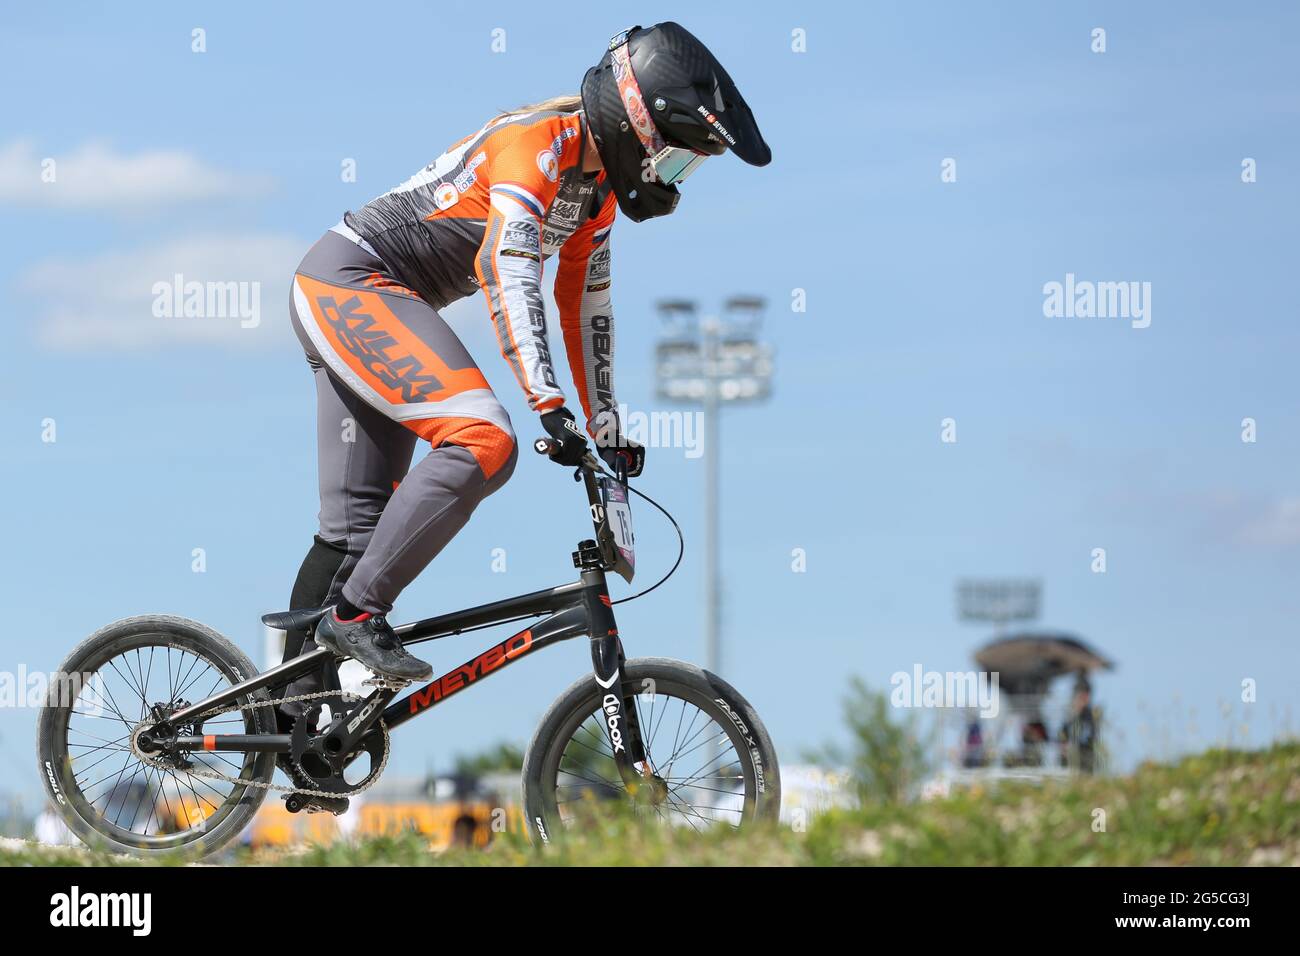 Merle VAN BENTHEM of the Netherlands competes in the UCI BMX Supercross  World Cup Round 1 at the BMX Olympic Arena on May 8th 2021 in Verona, Italy  Stock Photo - Alamy